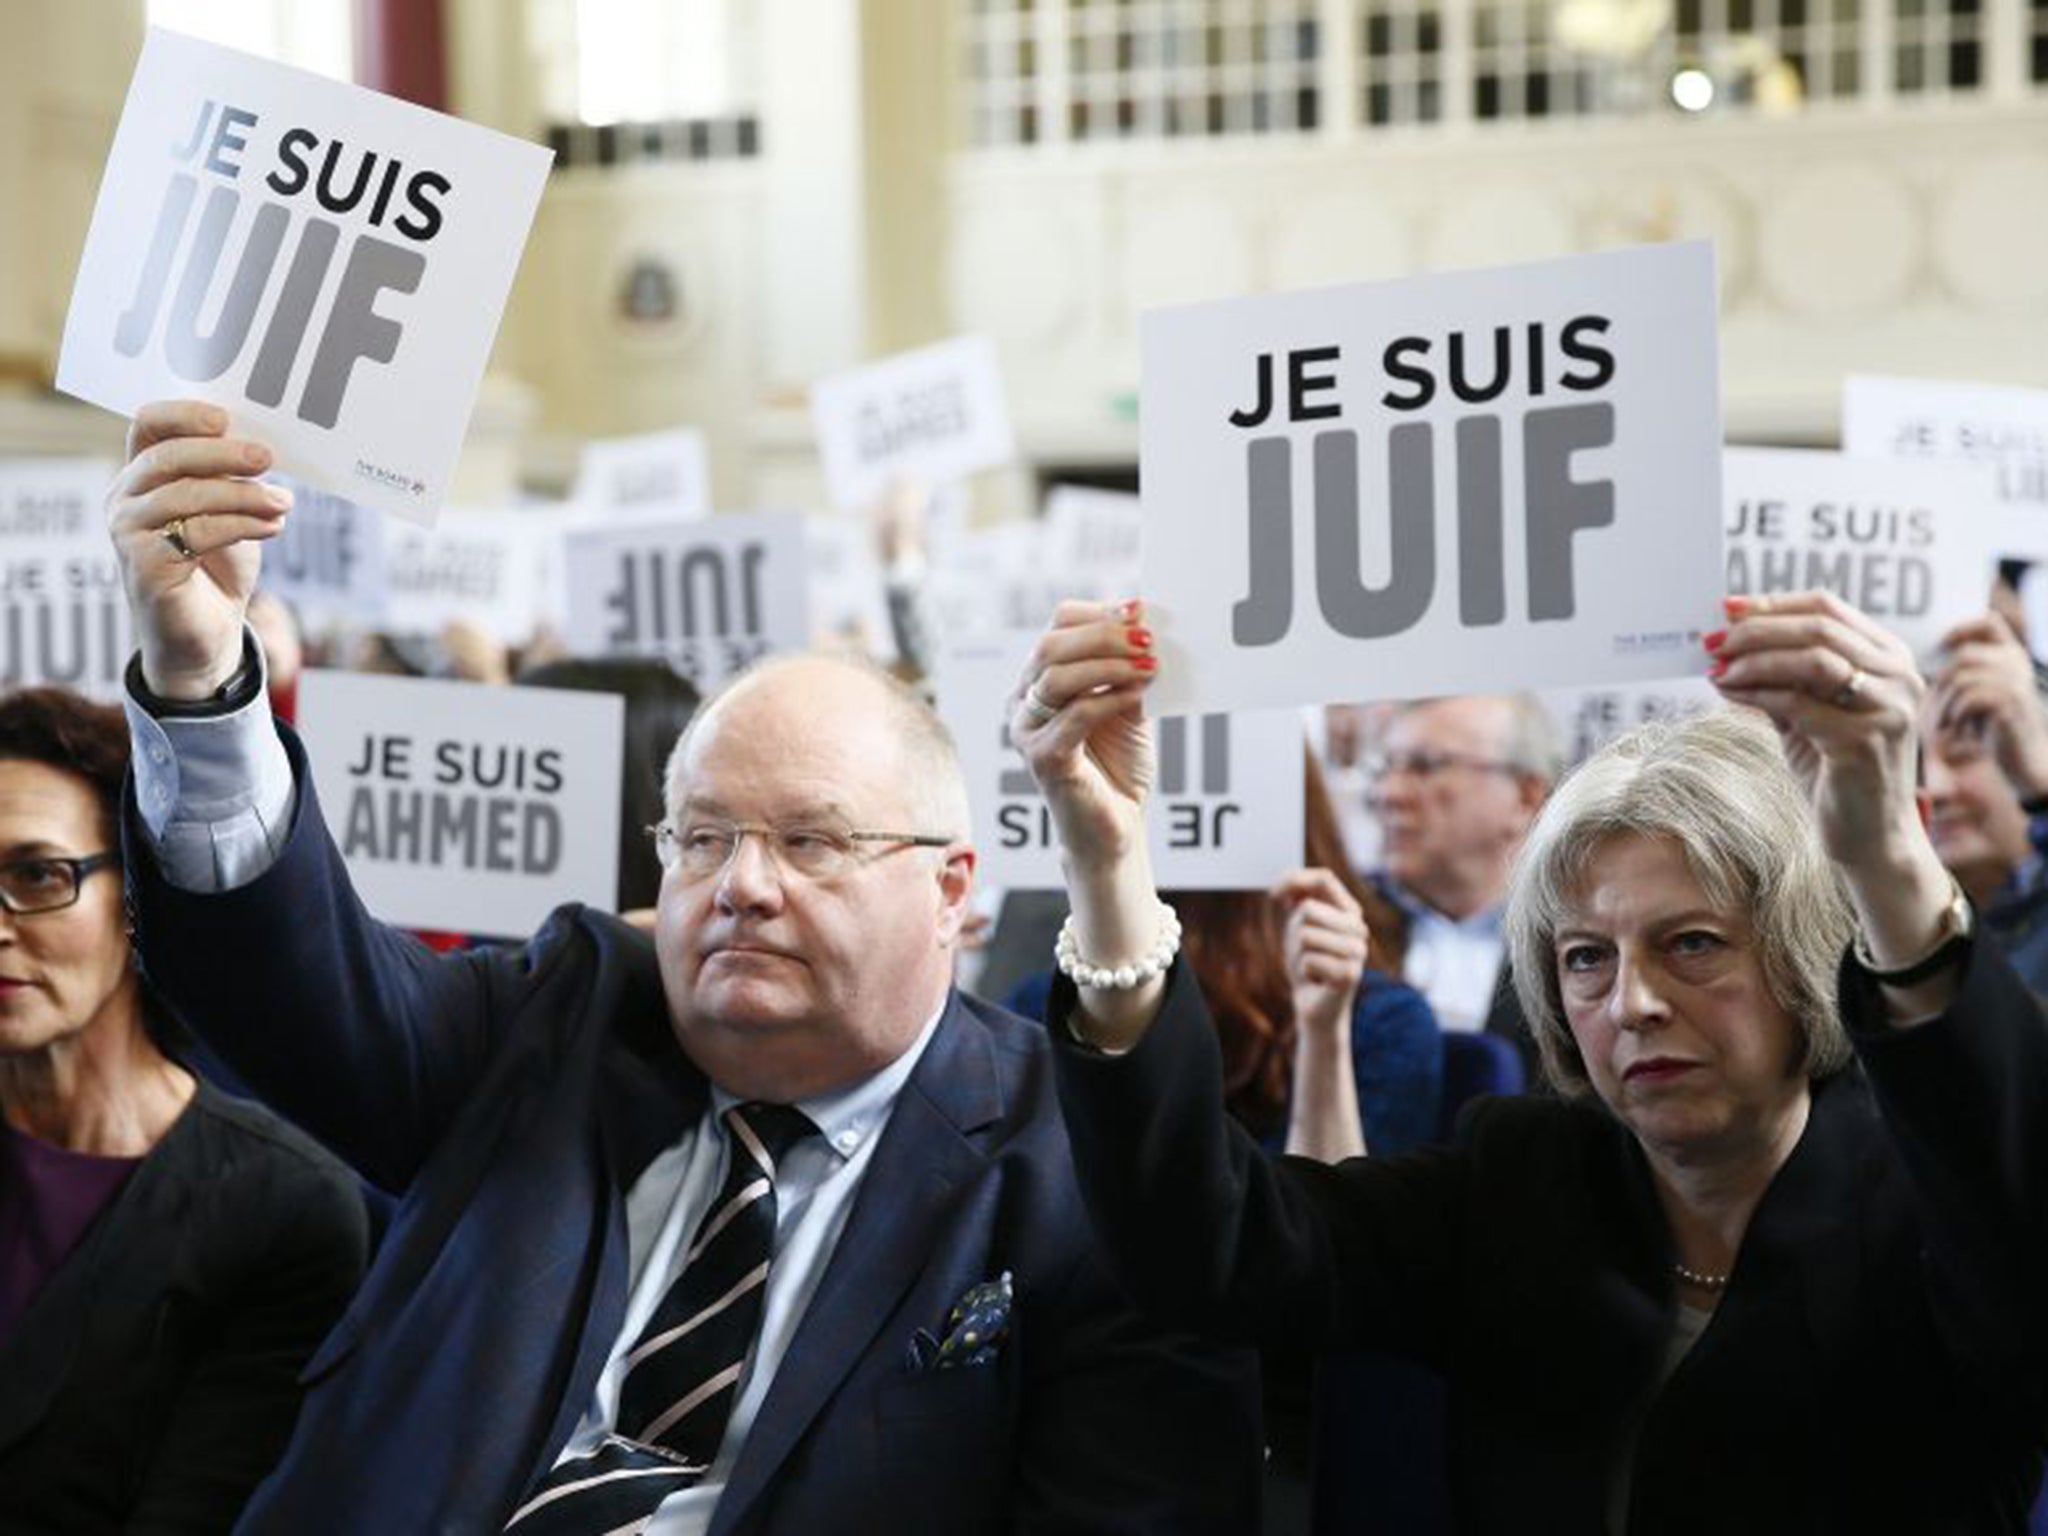 Theresa May and Eric Pickles, the Secretary of State for Communities, hold ‘I am Jewish’ signs at the event (Re